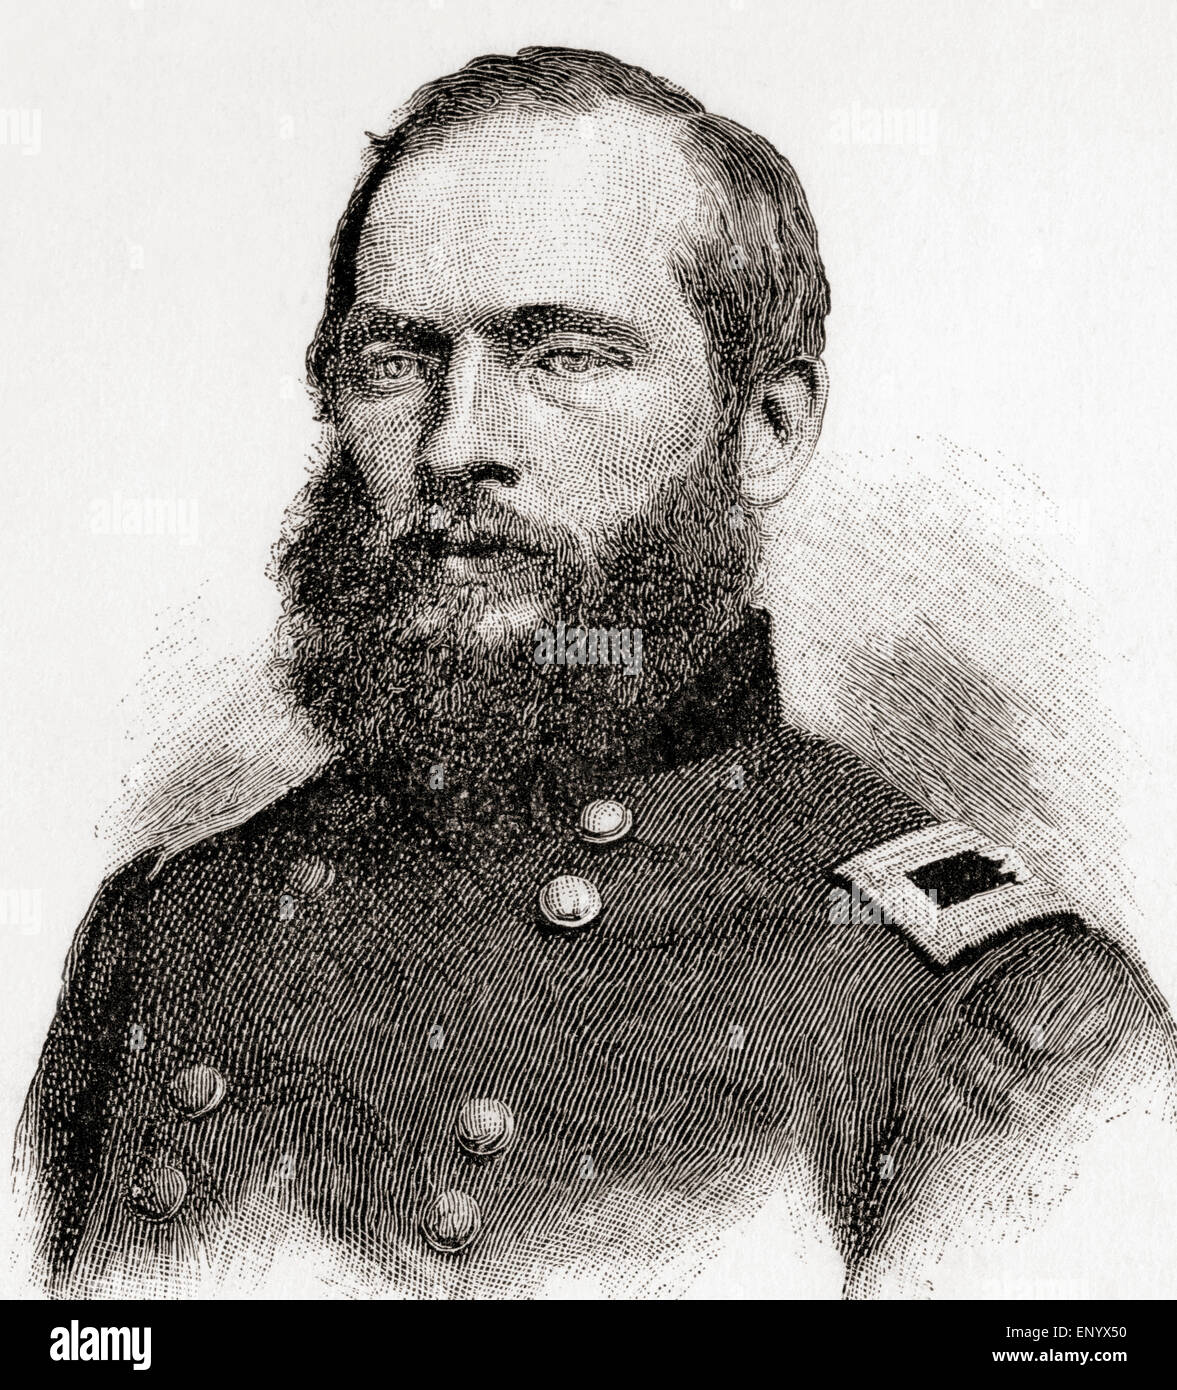 James Abram Garfield, 1831 – 1881.  20th President of the United States of America serving from March 4, 1881, until his assassination later that year.  From The Century Magazine, published 1887. Stock Photo